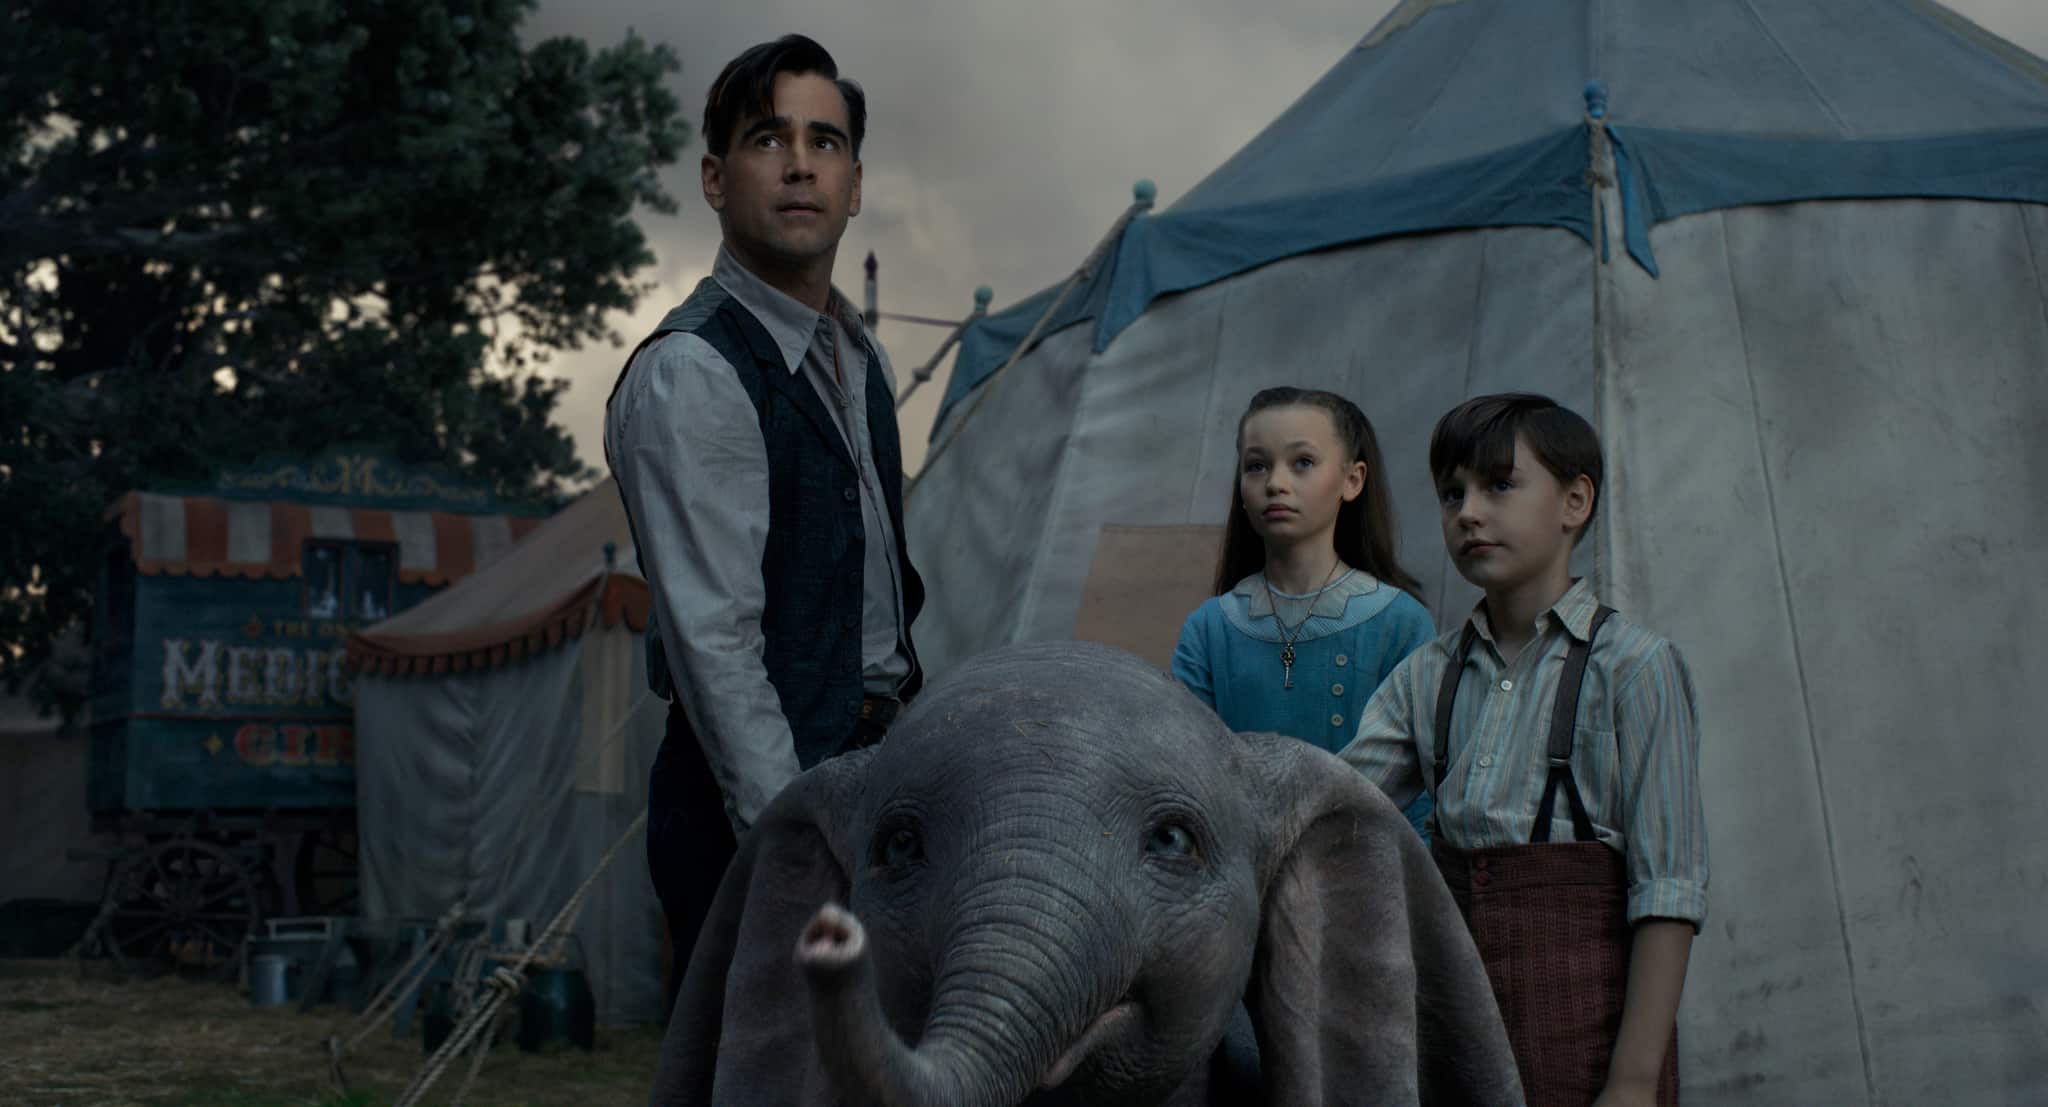 Colin Farrell, Nico Parker, and Finley Hobbins in this image from Walt Disney Studios Motion Pictures